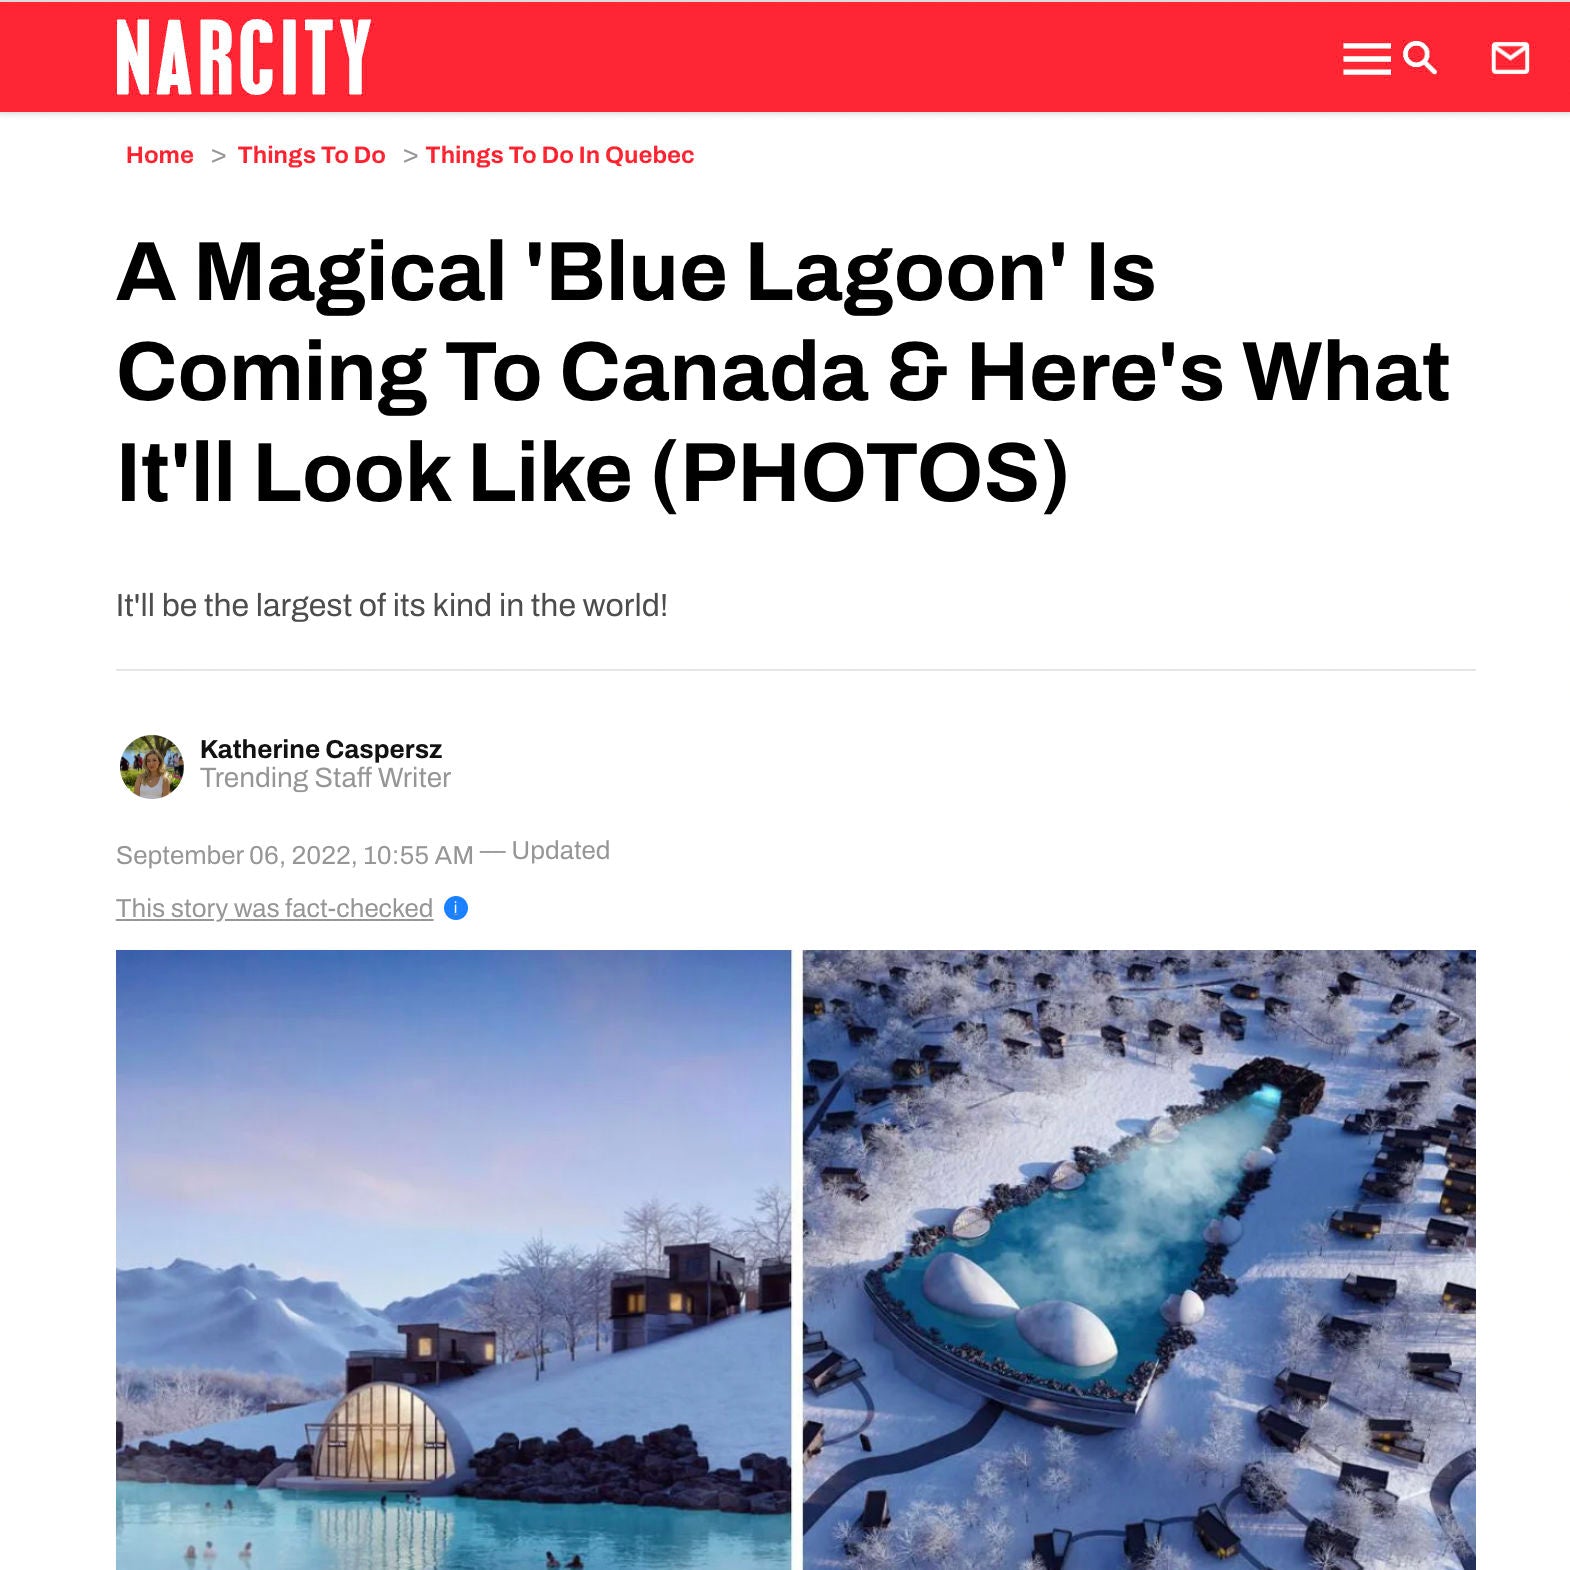 [EN] A Magical 'Blue Lagoon' Is Coming To Canada & Here's What It'll Look Like (PHOTOS)